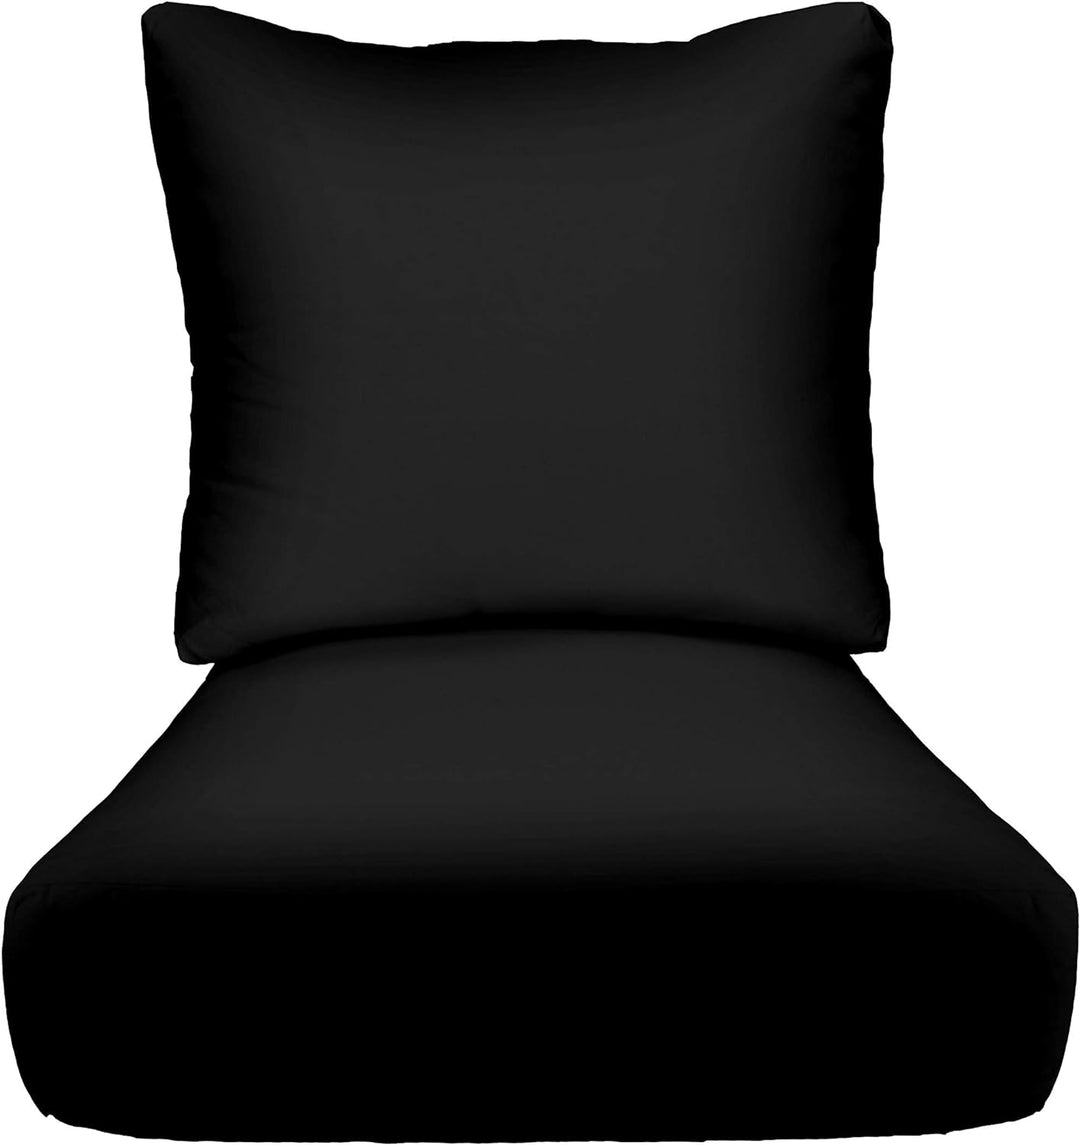 RSH Décor Indoor Outdoor Deep Seating Cushion Set, 24”x 27” x 5” Seat and 25” x 21” Back, Black - RSH Decor